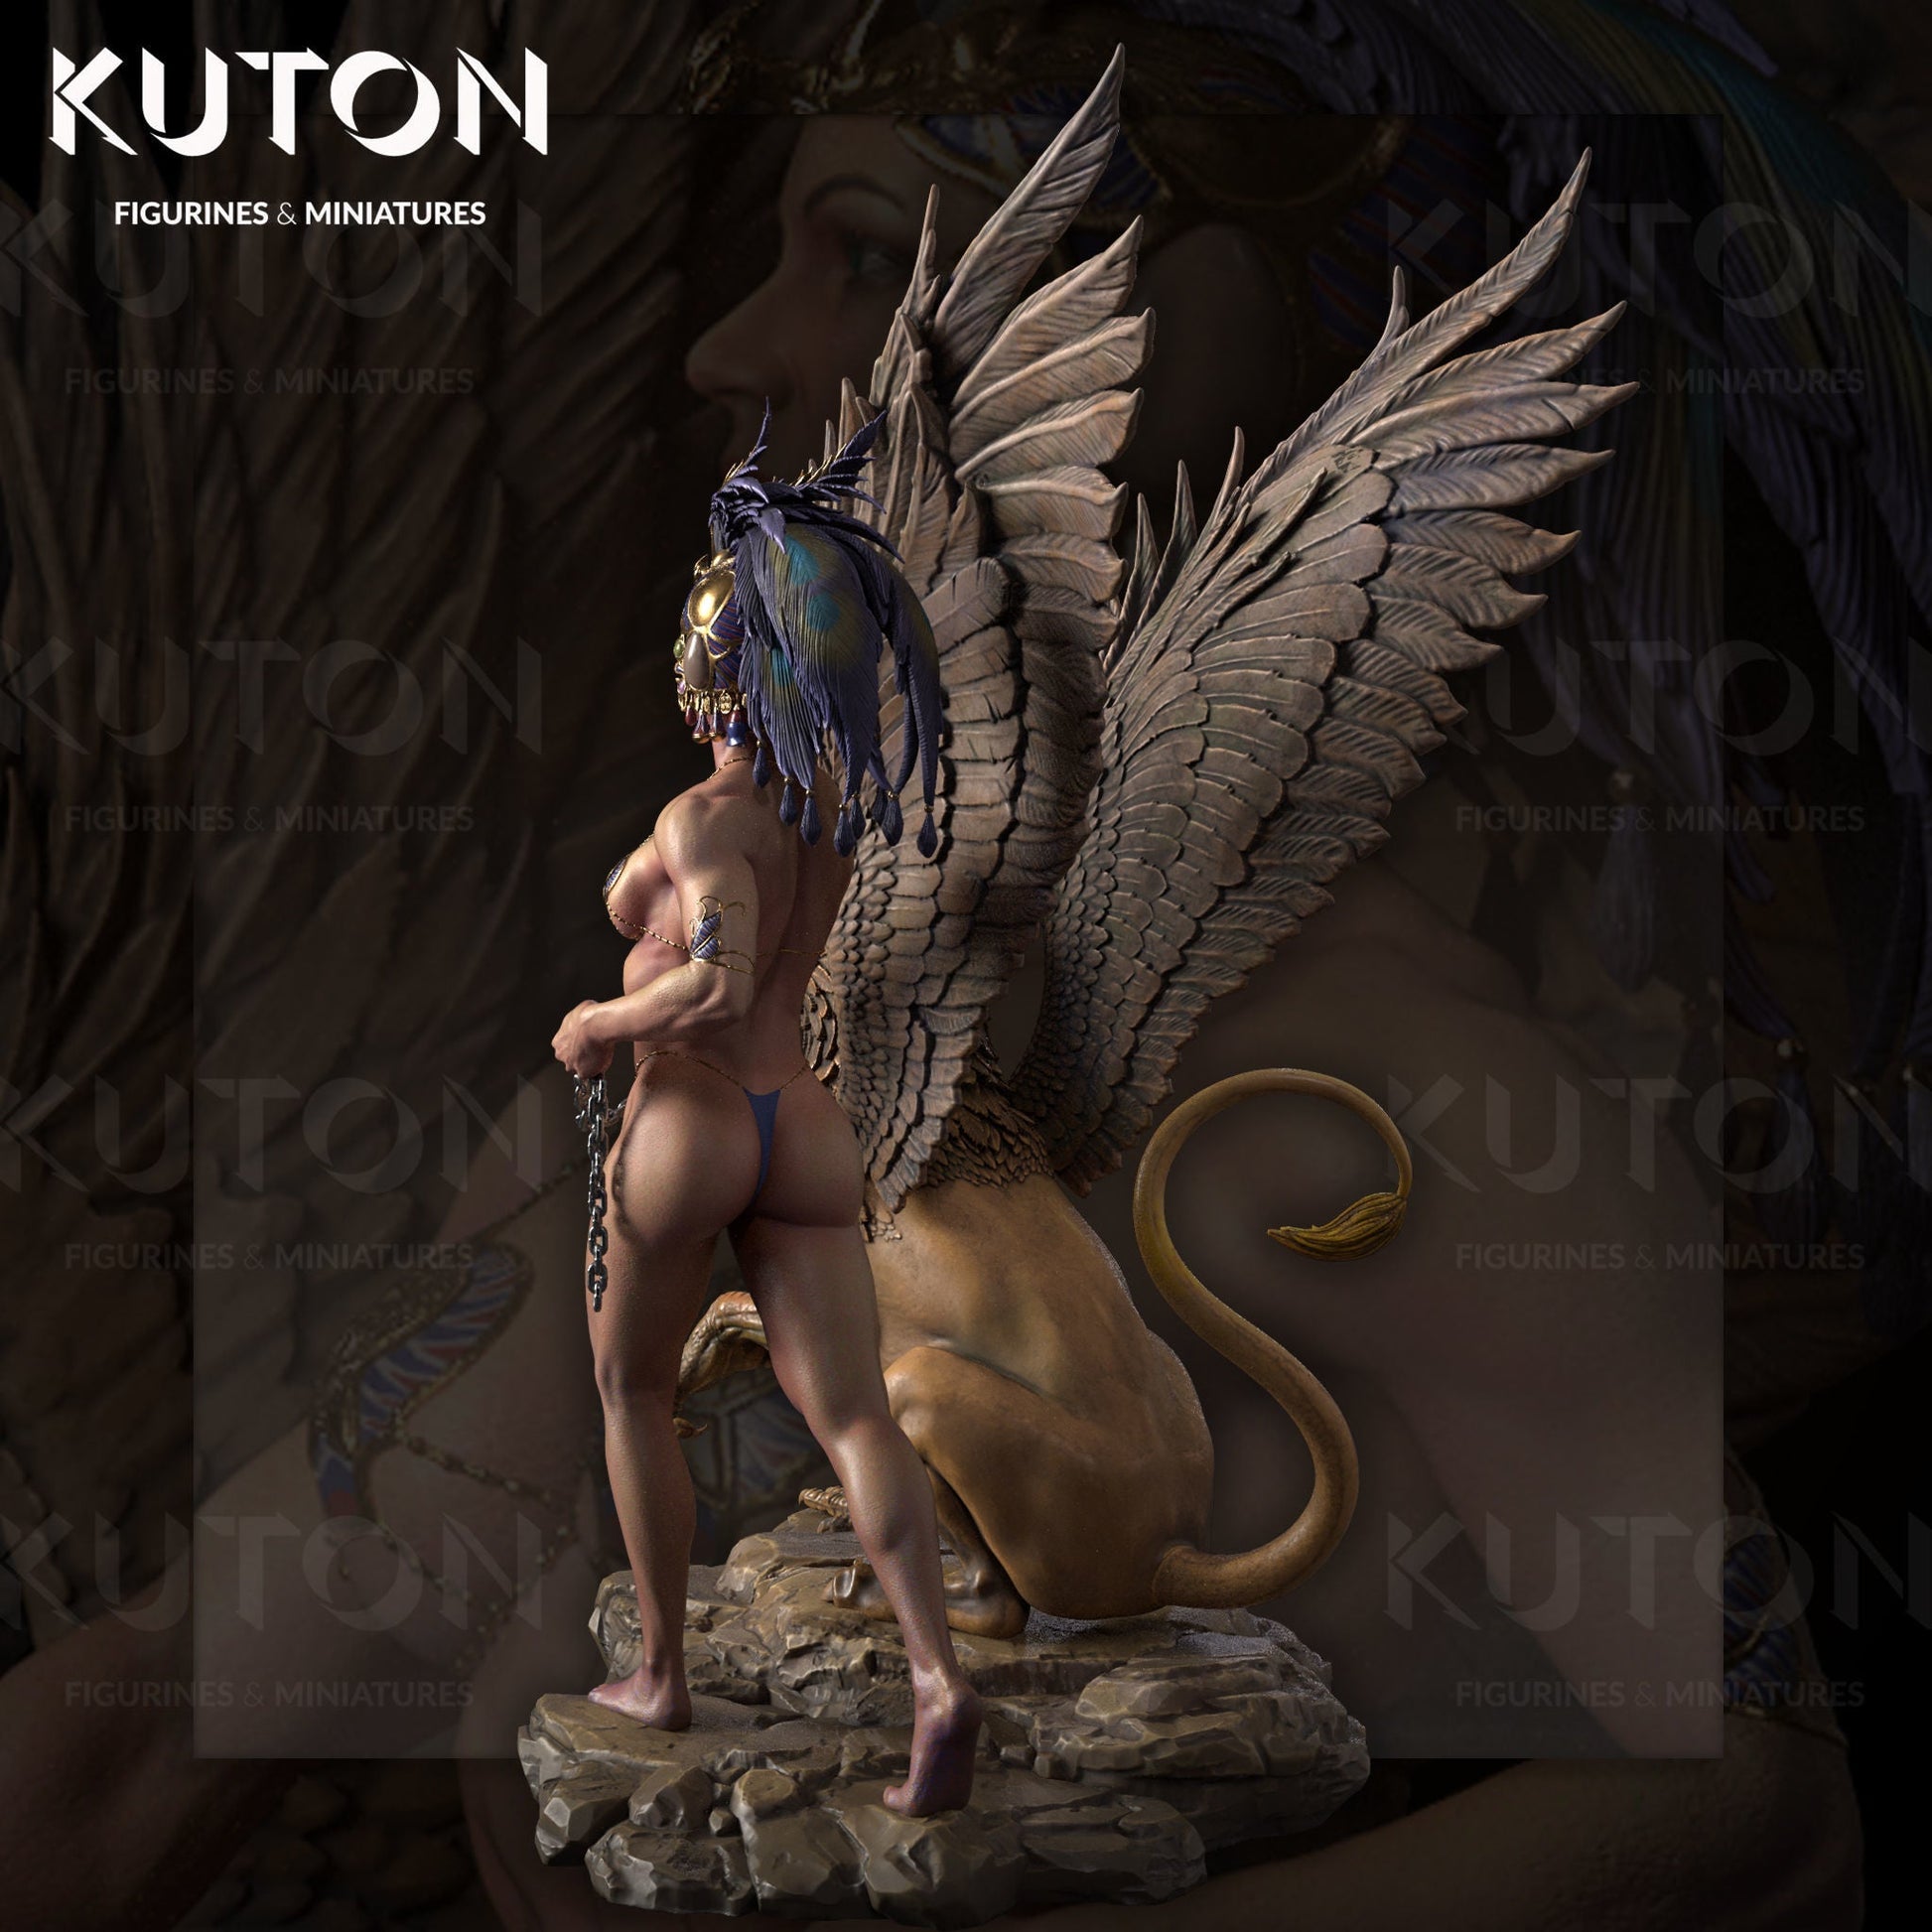 Gryphon 3d printed Resin Figure Model Kit miniatures collectibles UNPAINTED Fun Art by KUTON FIGURINES